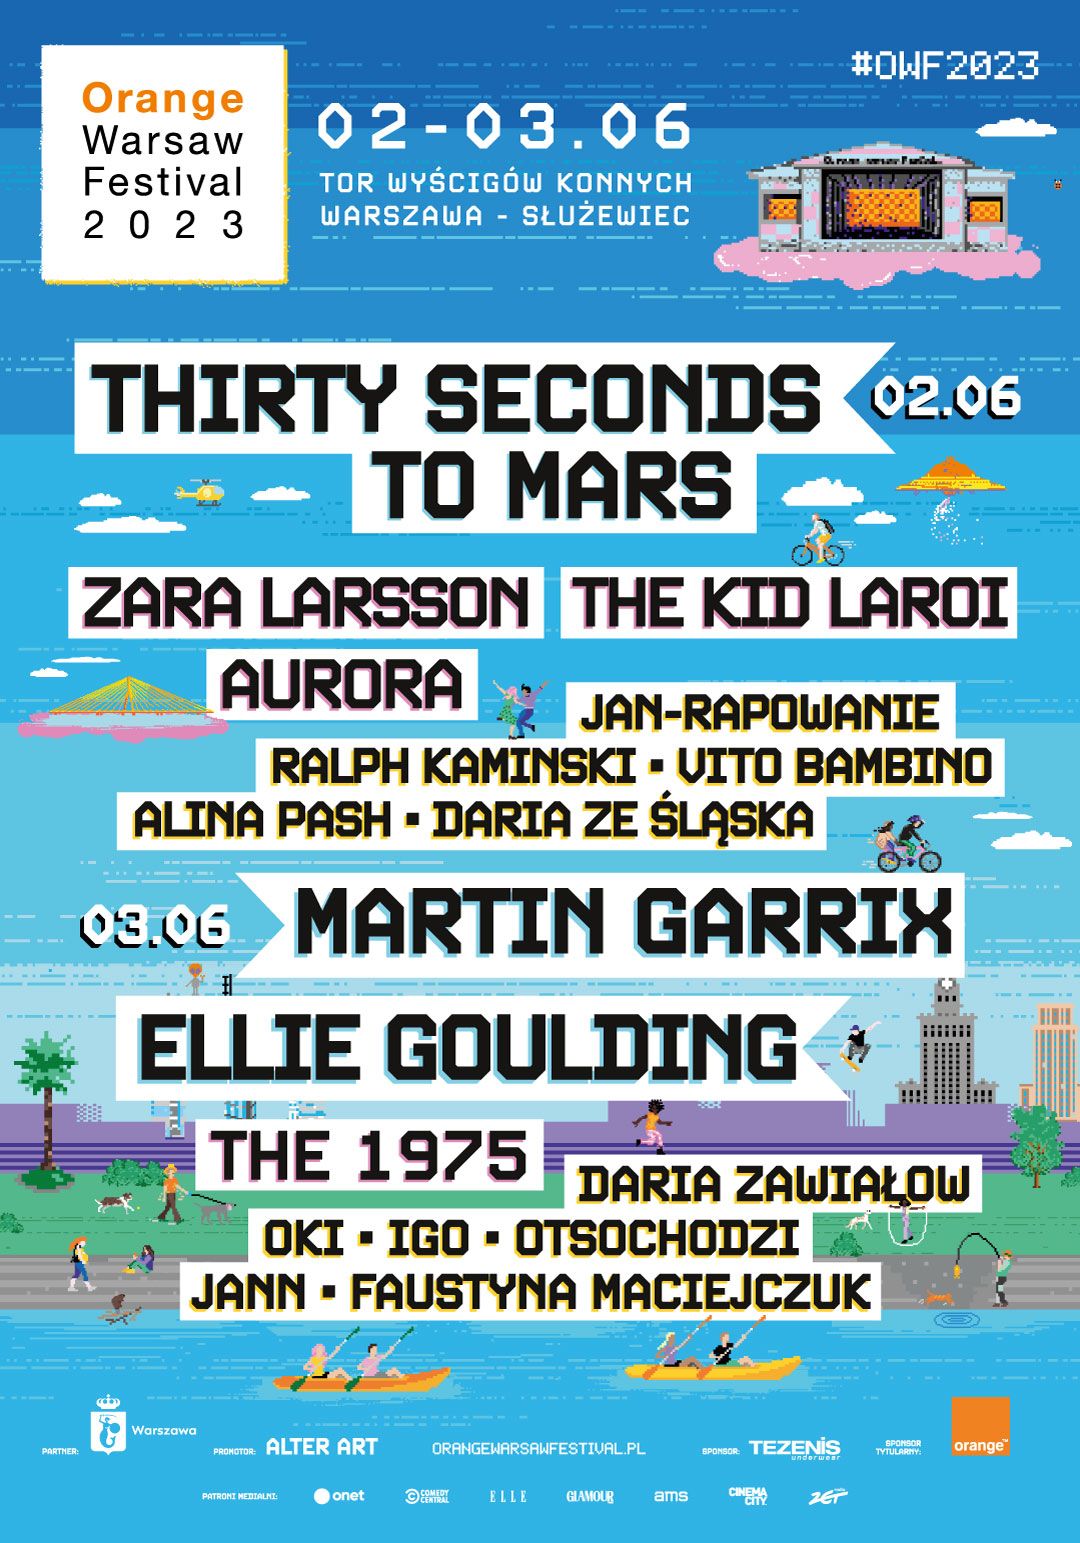 2023 line-up: Thirty Seconds To Mars, Martin Garrix, Ellie Goulding, Zara Larsson, The Kid LAROI, The 1975, Aurora and more